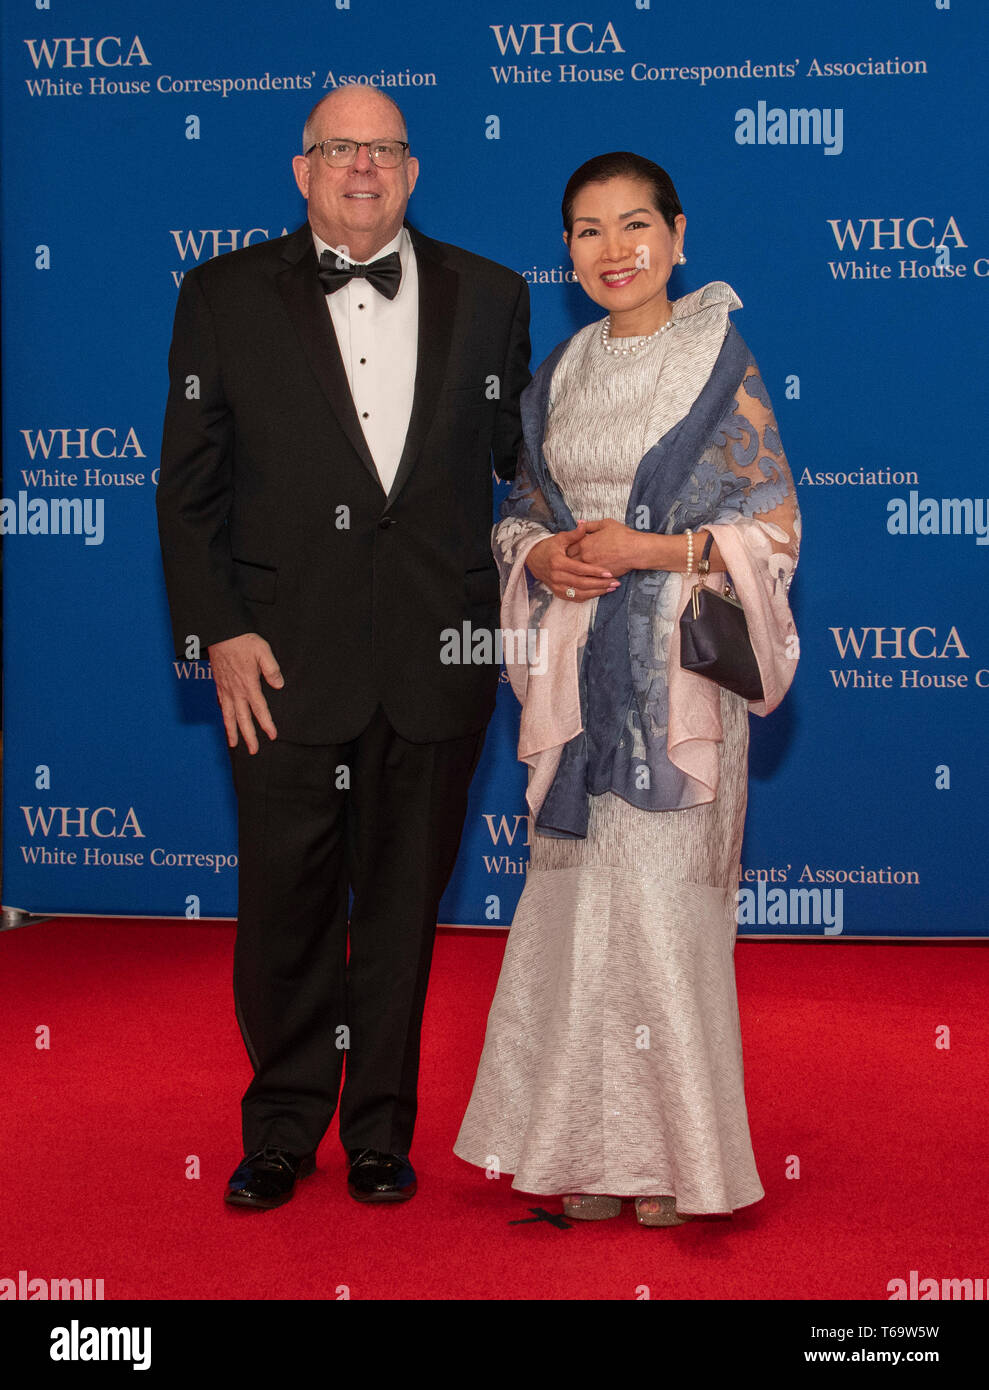 Governor Larry Hogan (Republican of Maryland) and his wife, Yumi, arrive for the 2019 White House Correspondents Association Annual Dinner at the Washington Hilton Hotel on Saturday, April 27, 2019. Credit: Ron Sachs/CNP (RESTRICTION: NO New York or New Jersey Newspapers or newspapers within a 75 mile radius of New York City) | usage worldwide Stock Photo